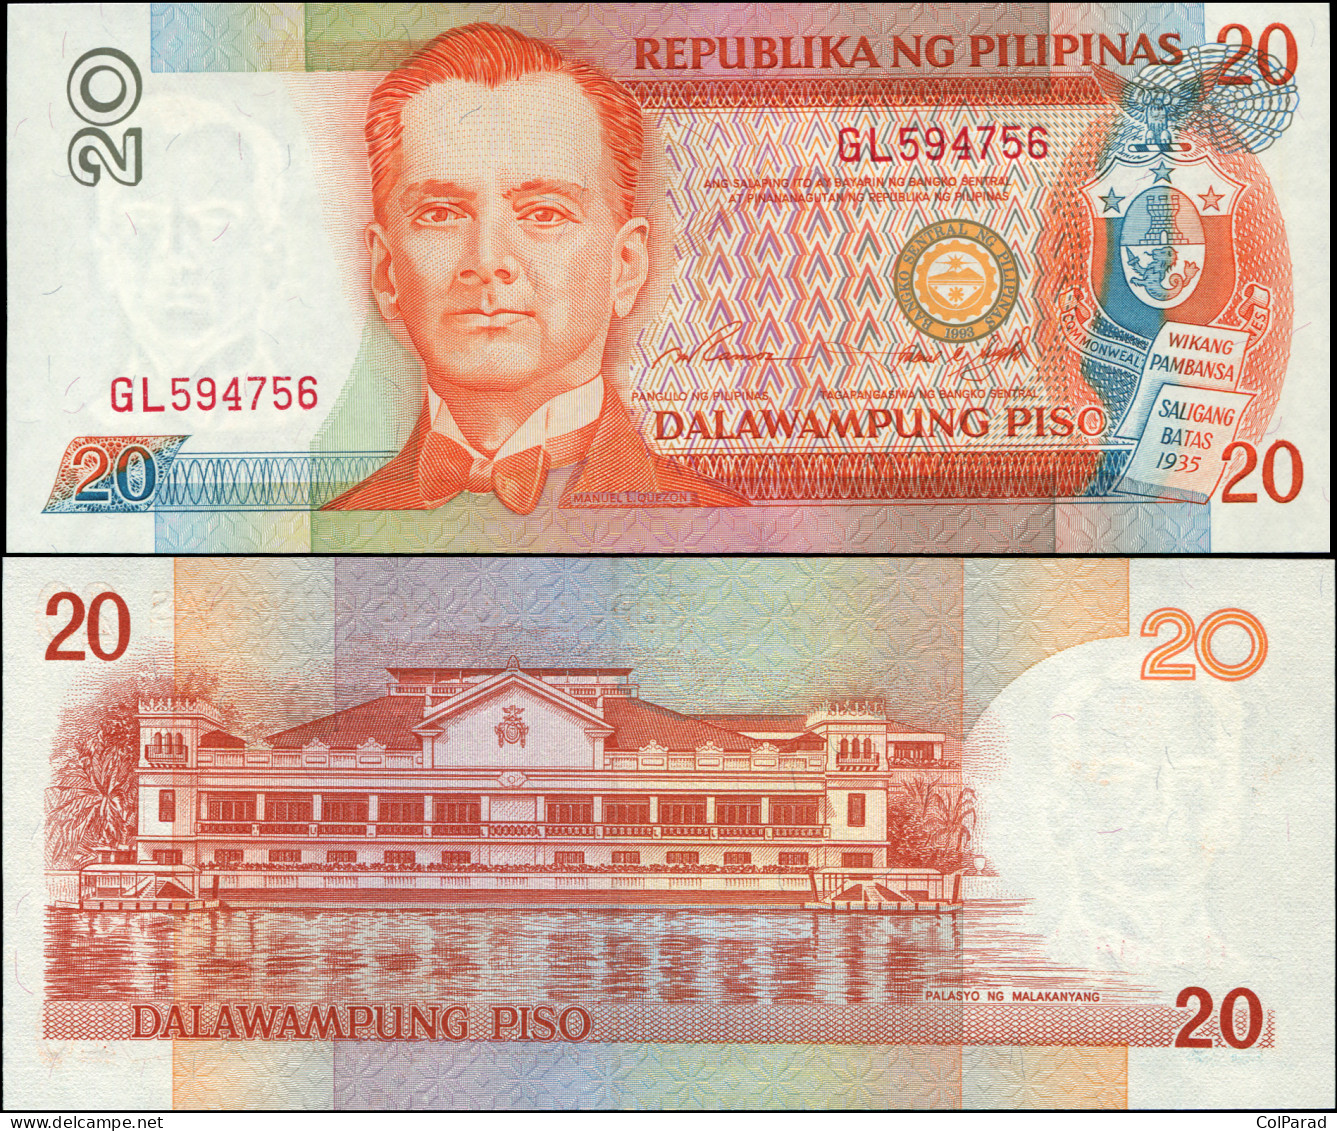 PHILIPPINES 20 PISO - ND (1997) - Paper Unc - P.182a Banknote - Filipinas